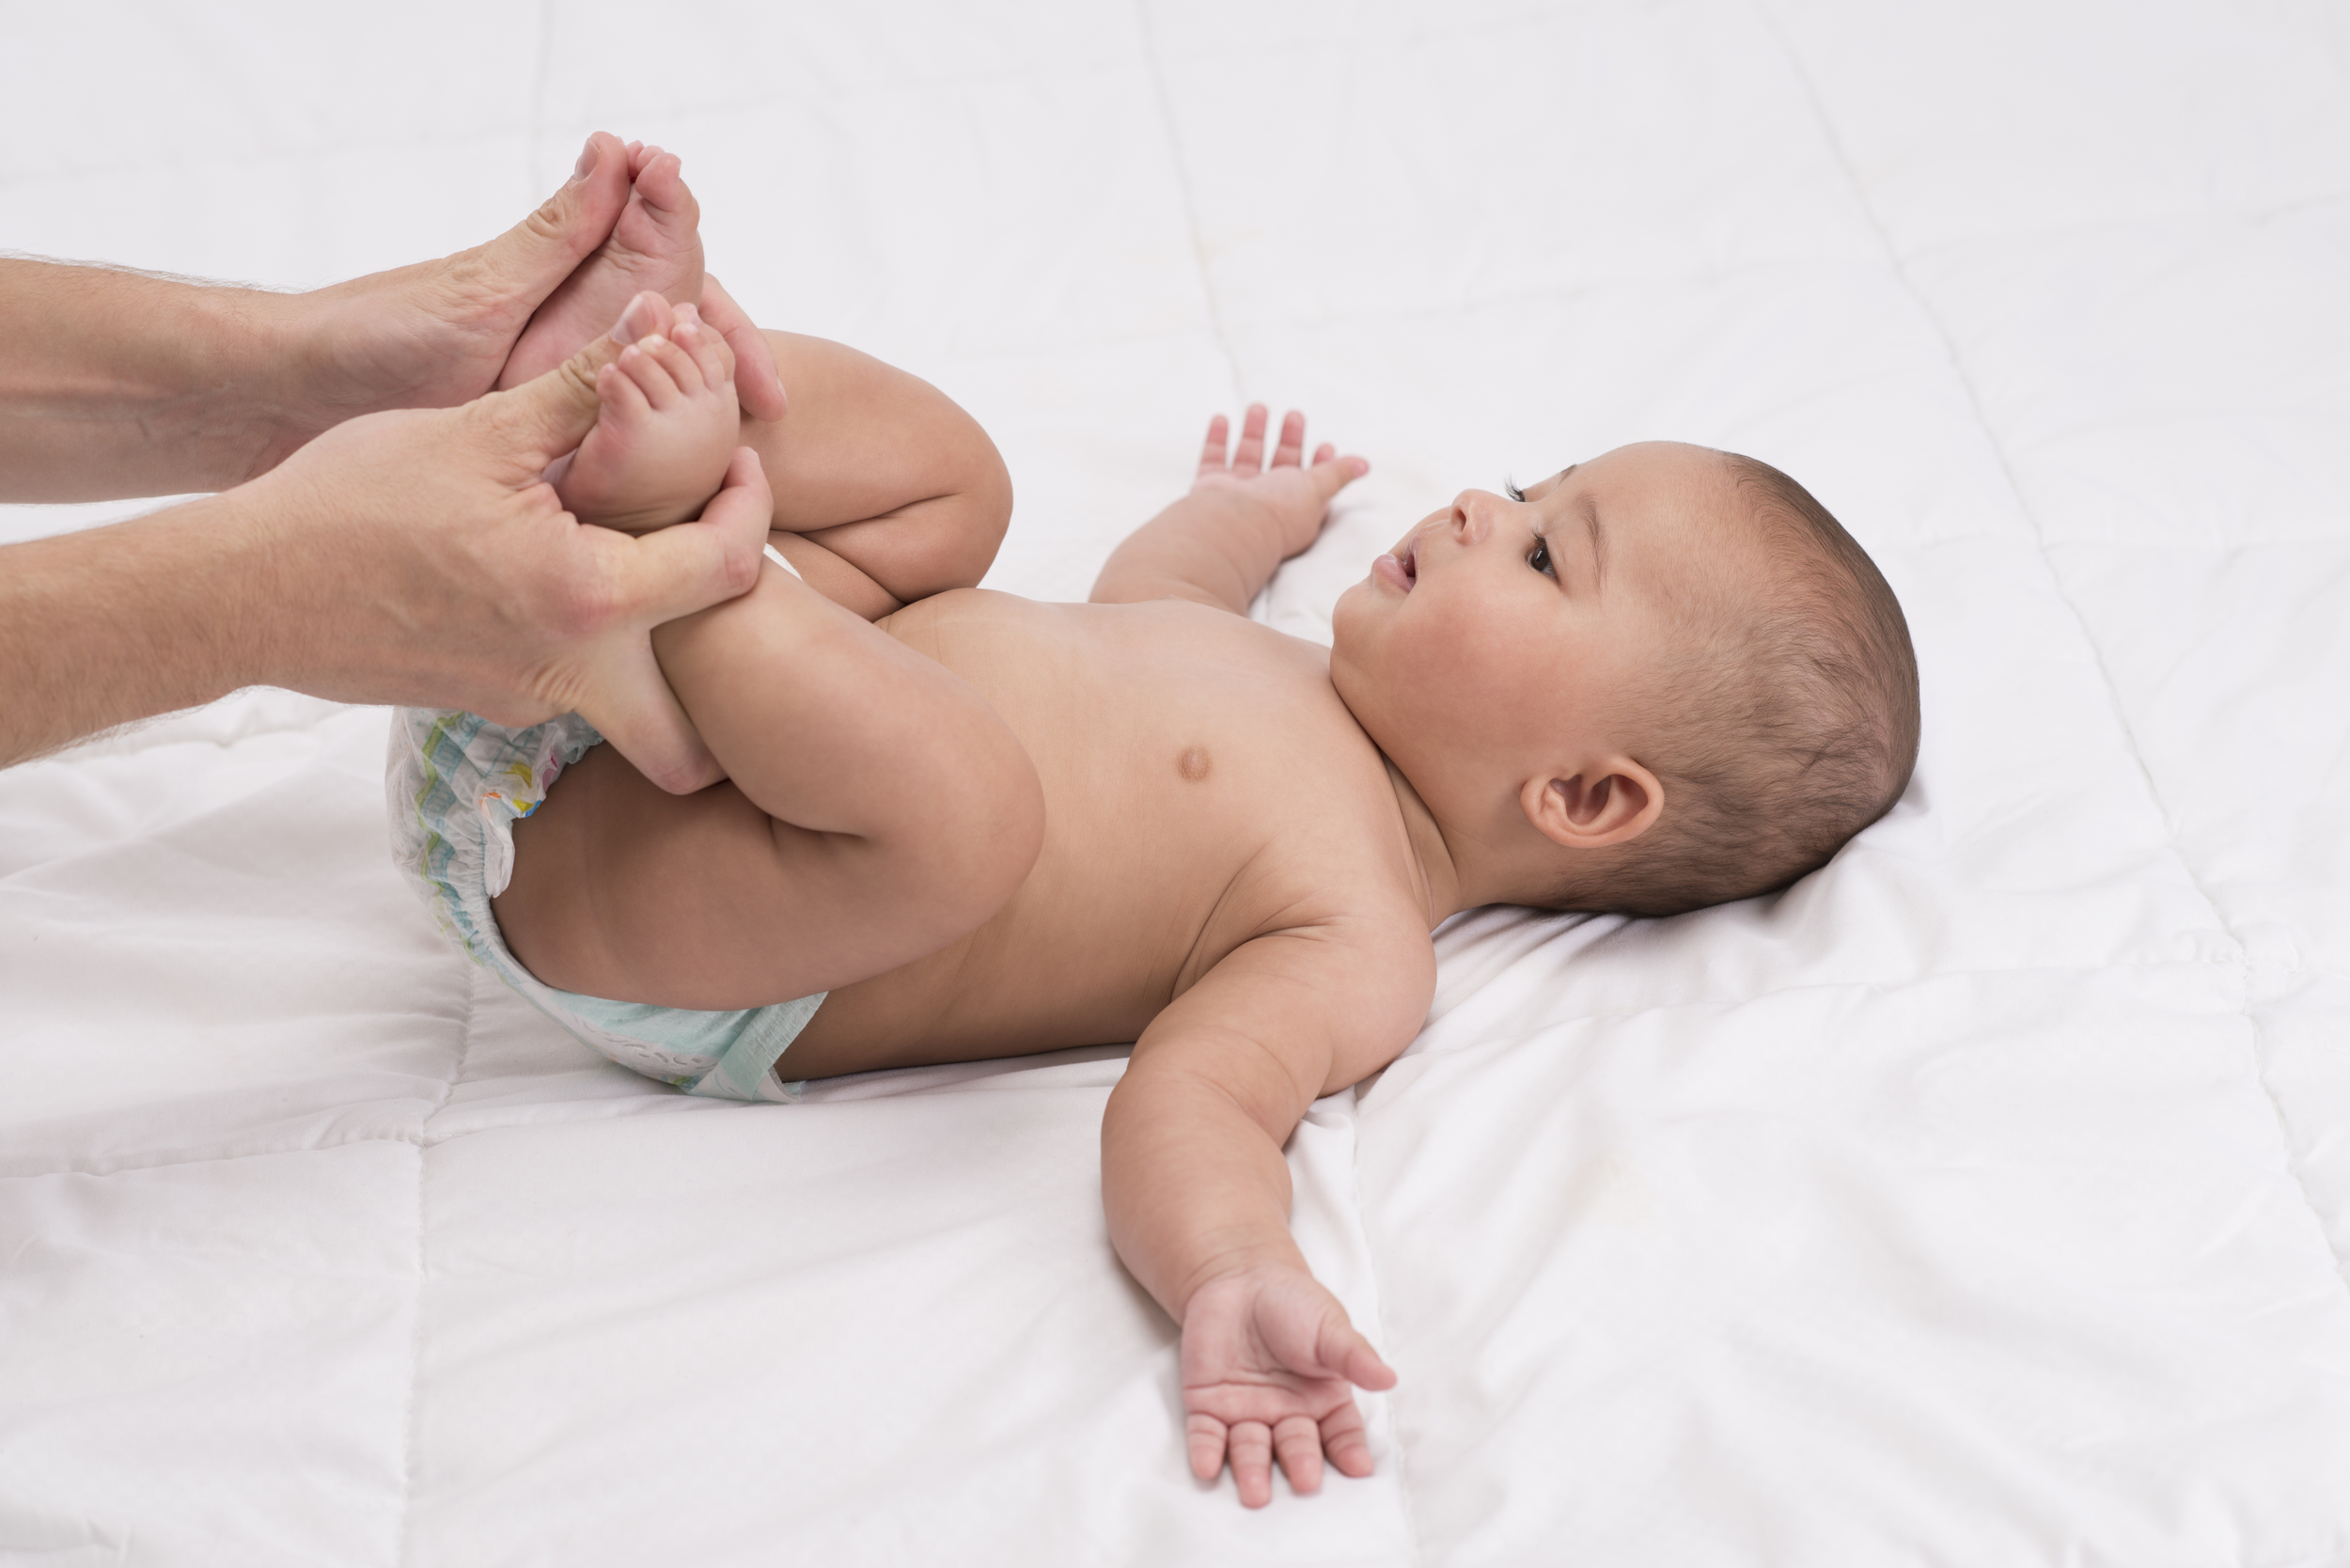 cyclic motion with baby's legs to soothe colicky baby